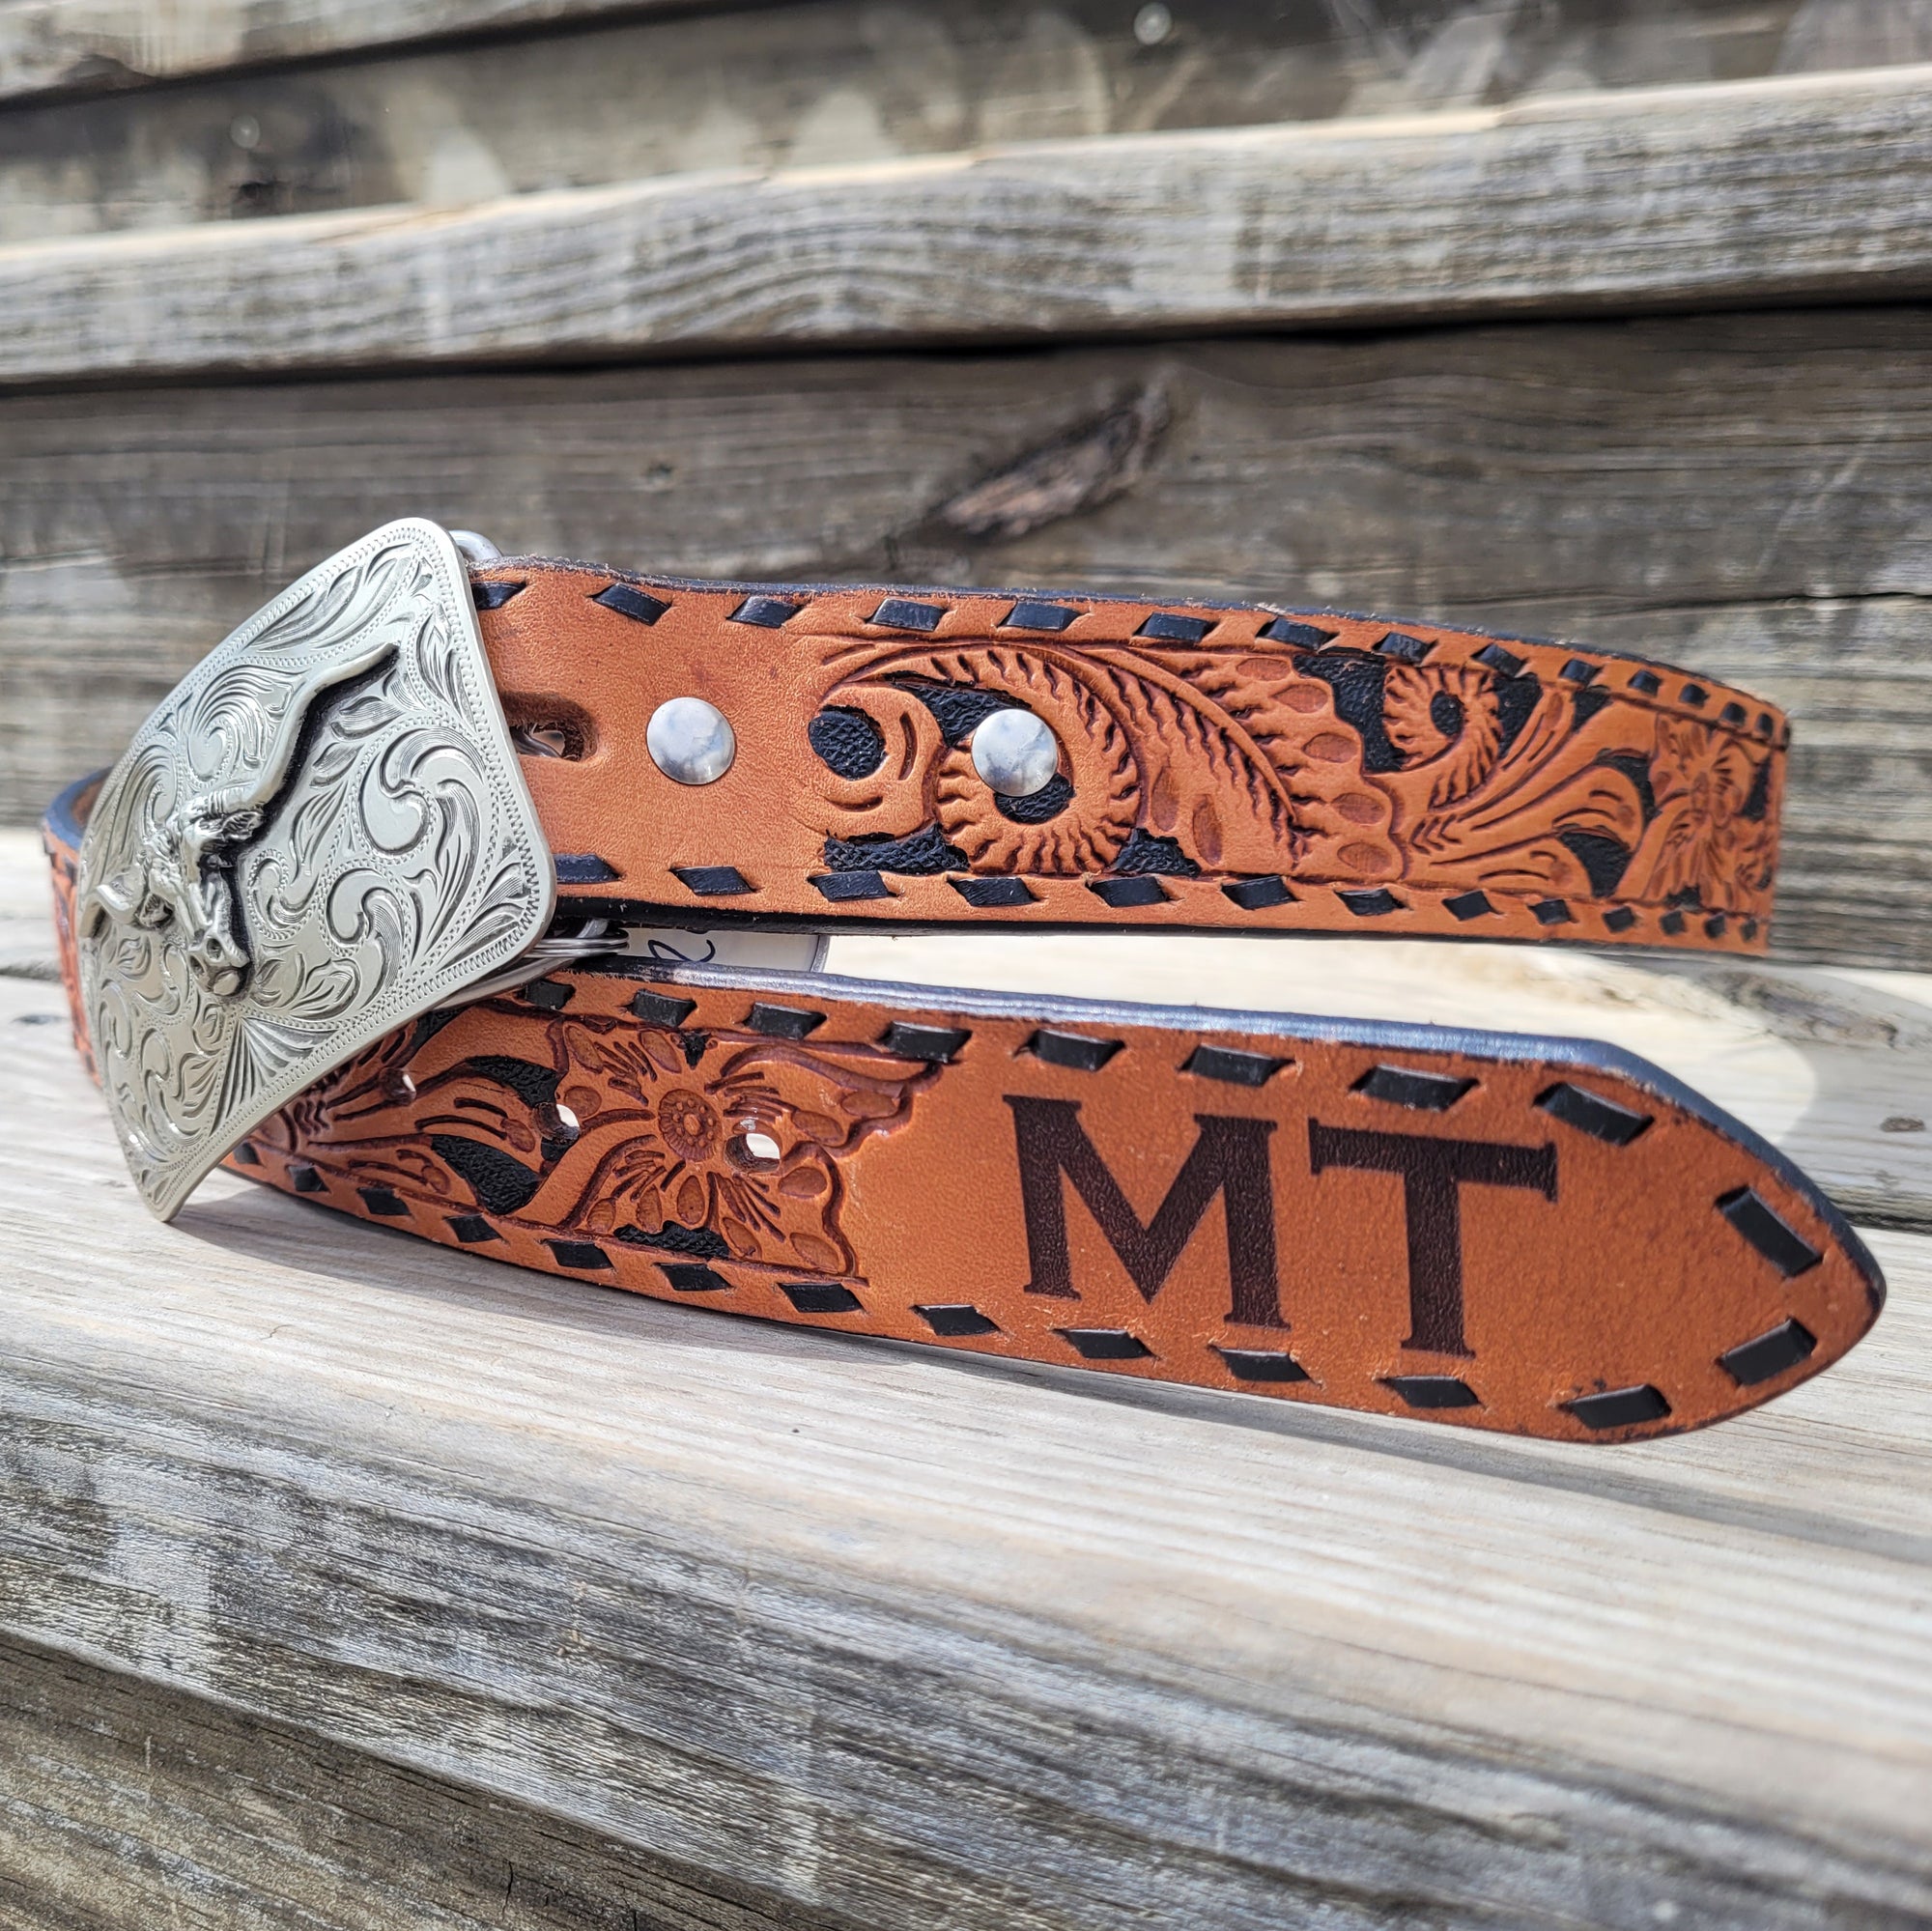 Darby Floral Tooled Buckstitch Belt with Initials MEN - Accessories - Belts & Suspenders Beddo Mountain Leather Goods   